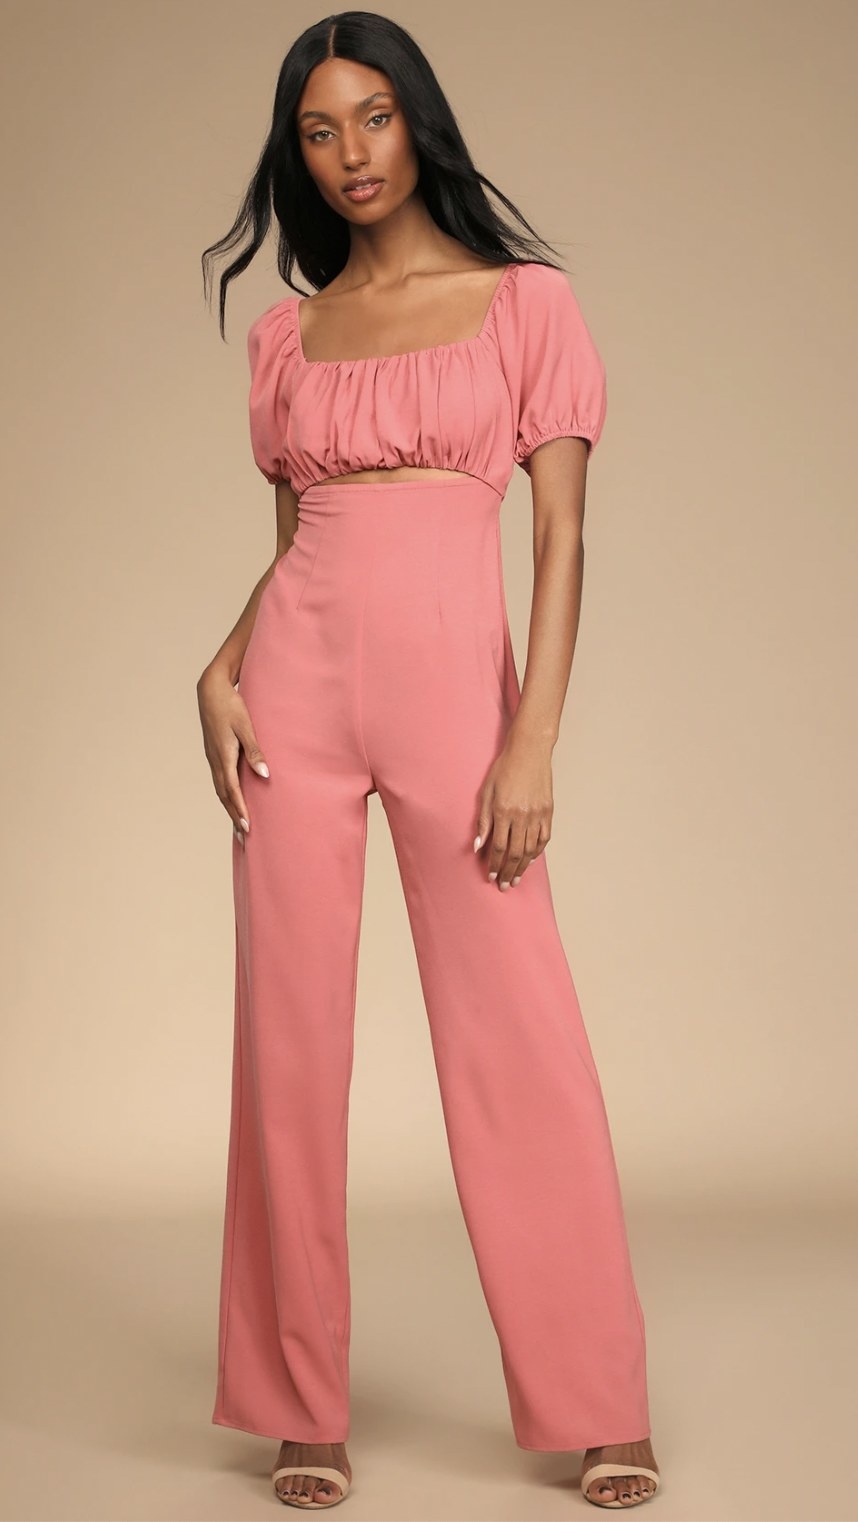 the jumpsuit in rose